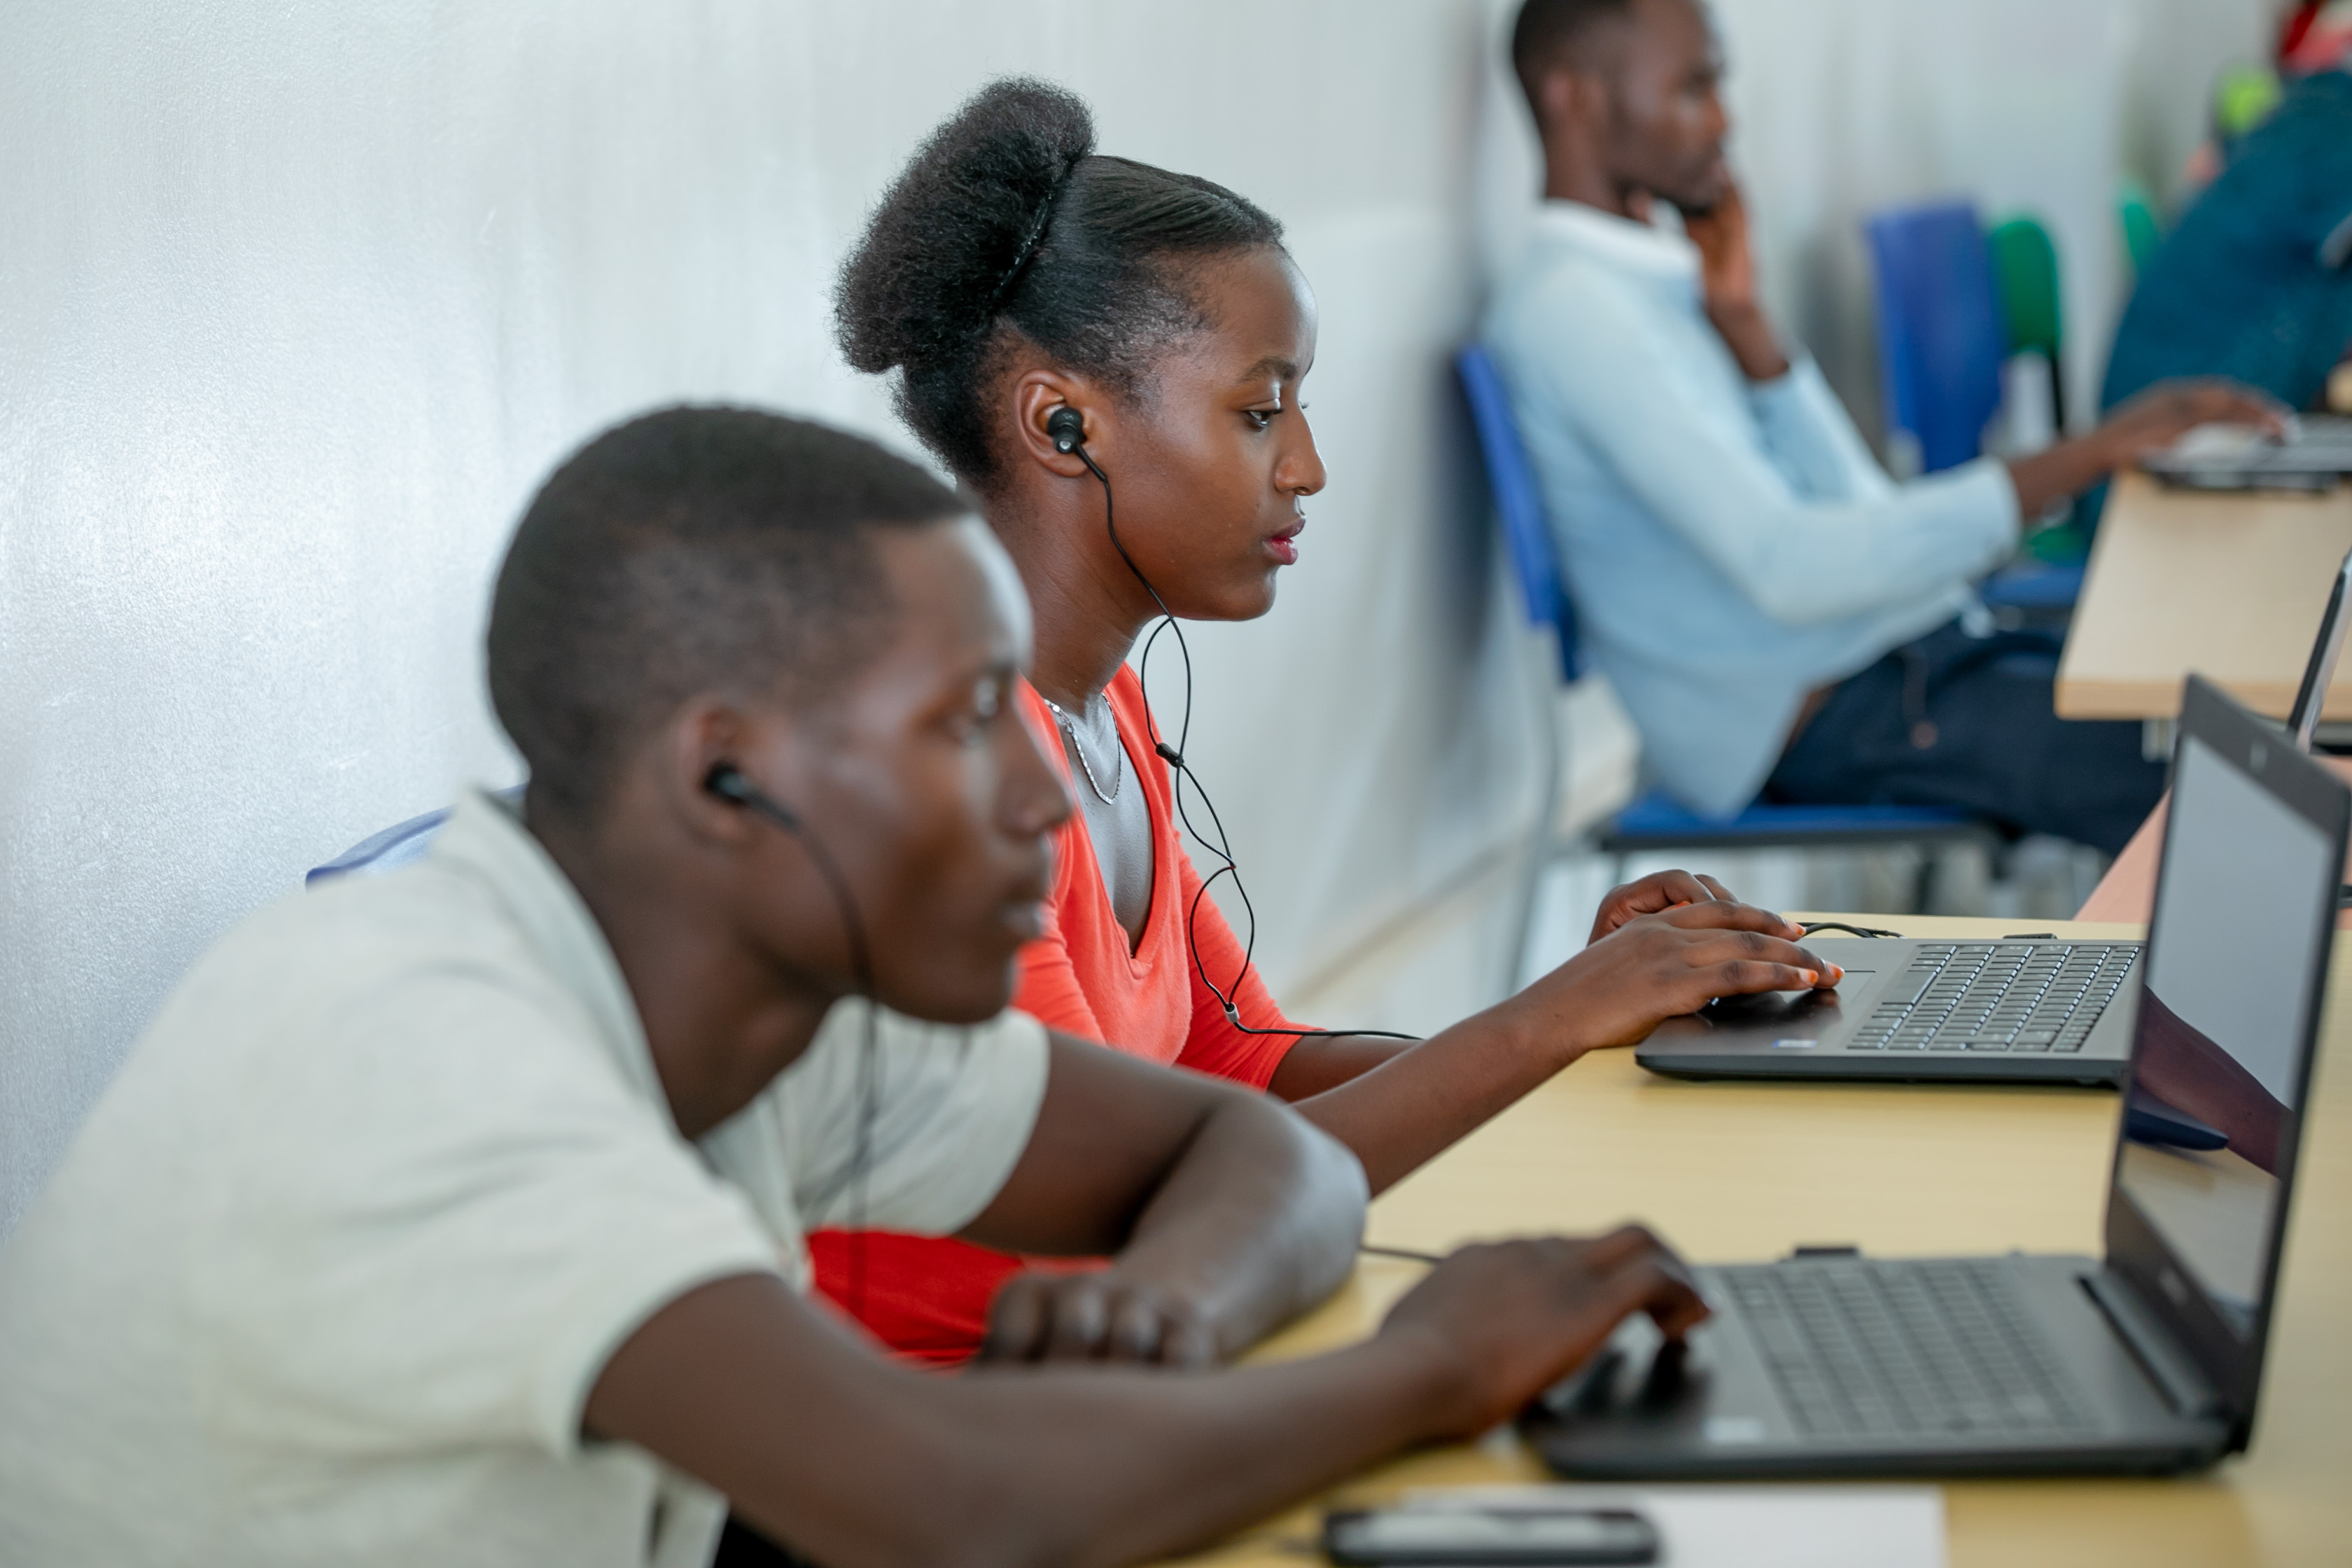 For Rwanda, All e-Learning Lessons To Be Retaken In In-Person Classes